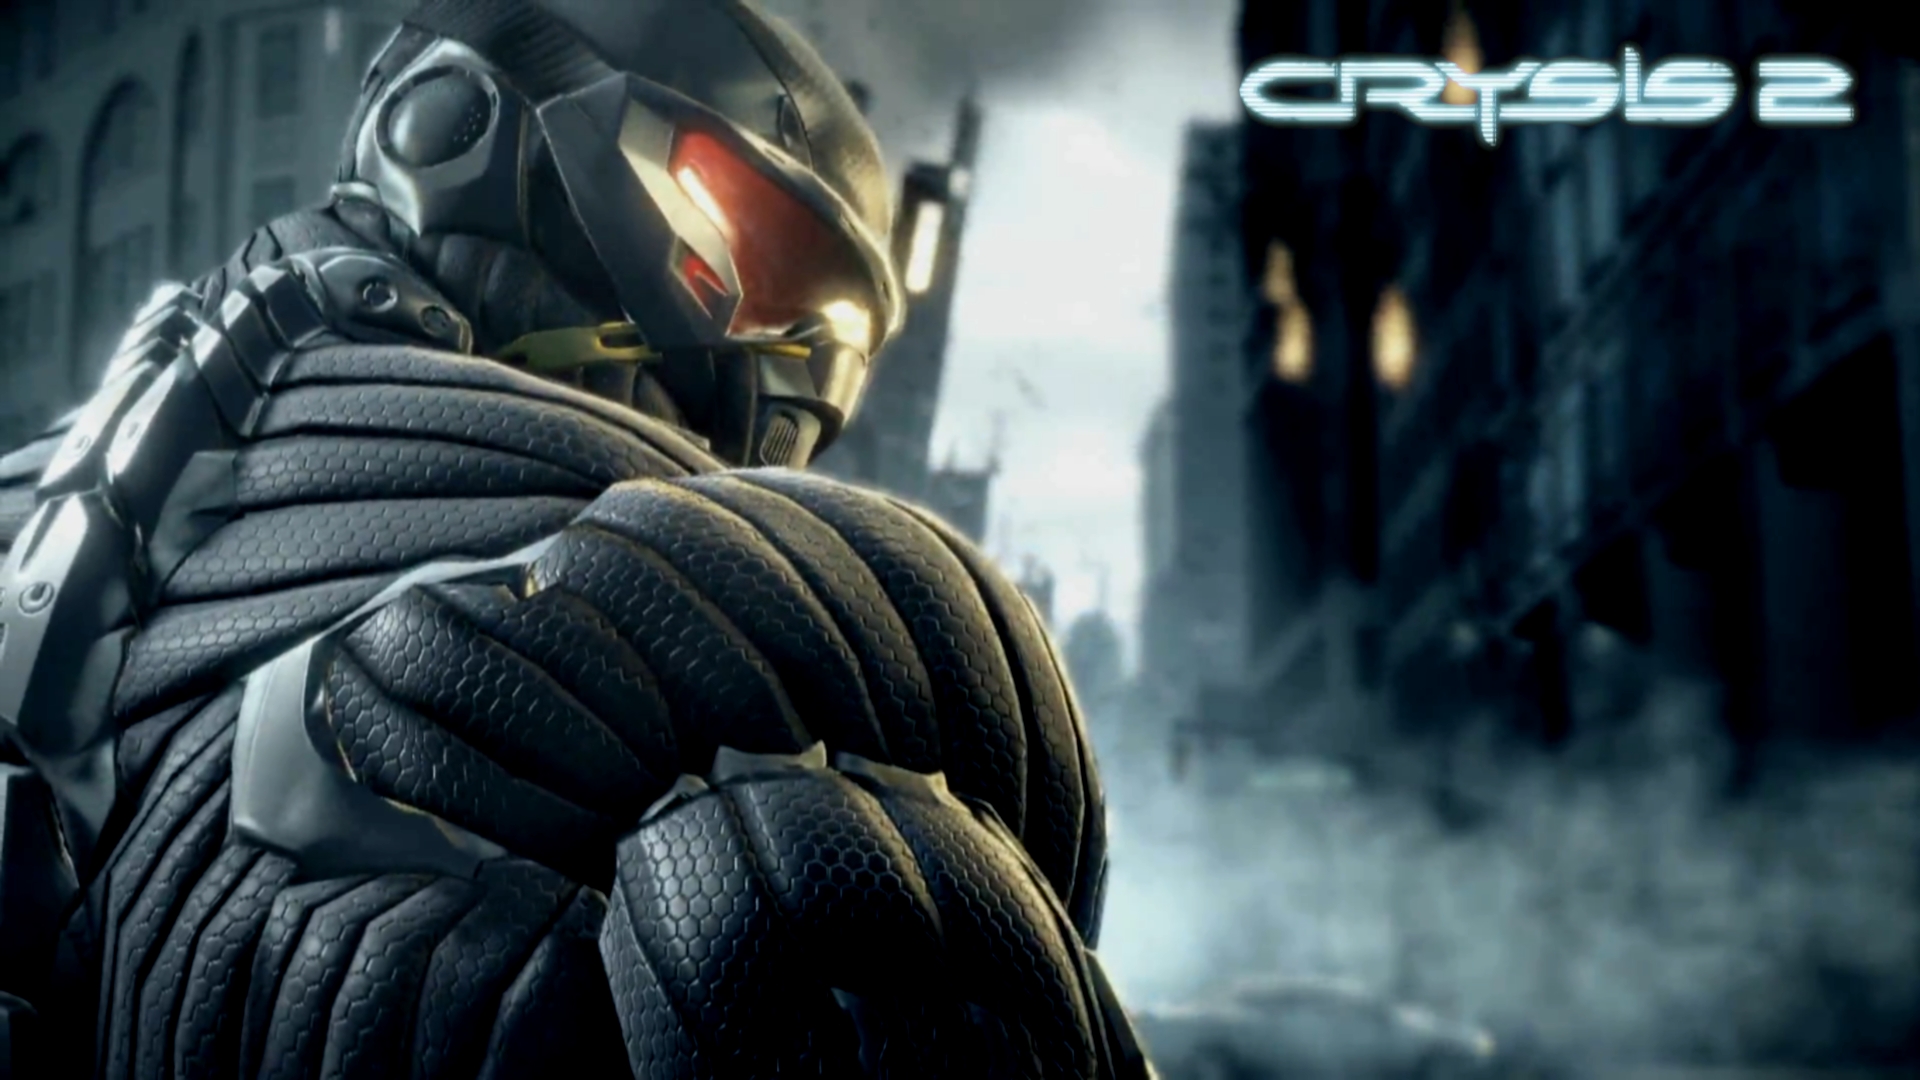 1410d1301000246-post-your-gamer-background-wallpapers-crysis-2-